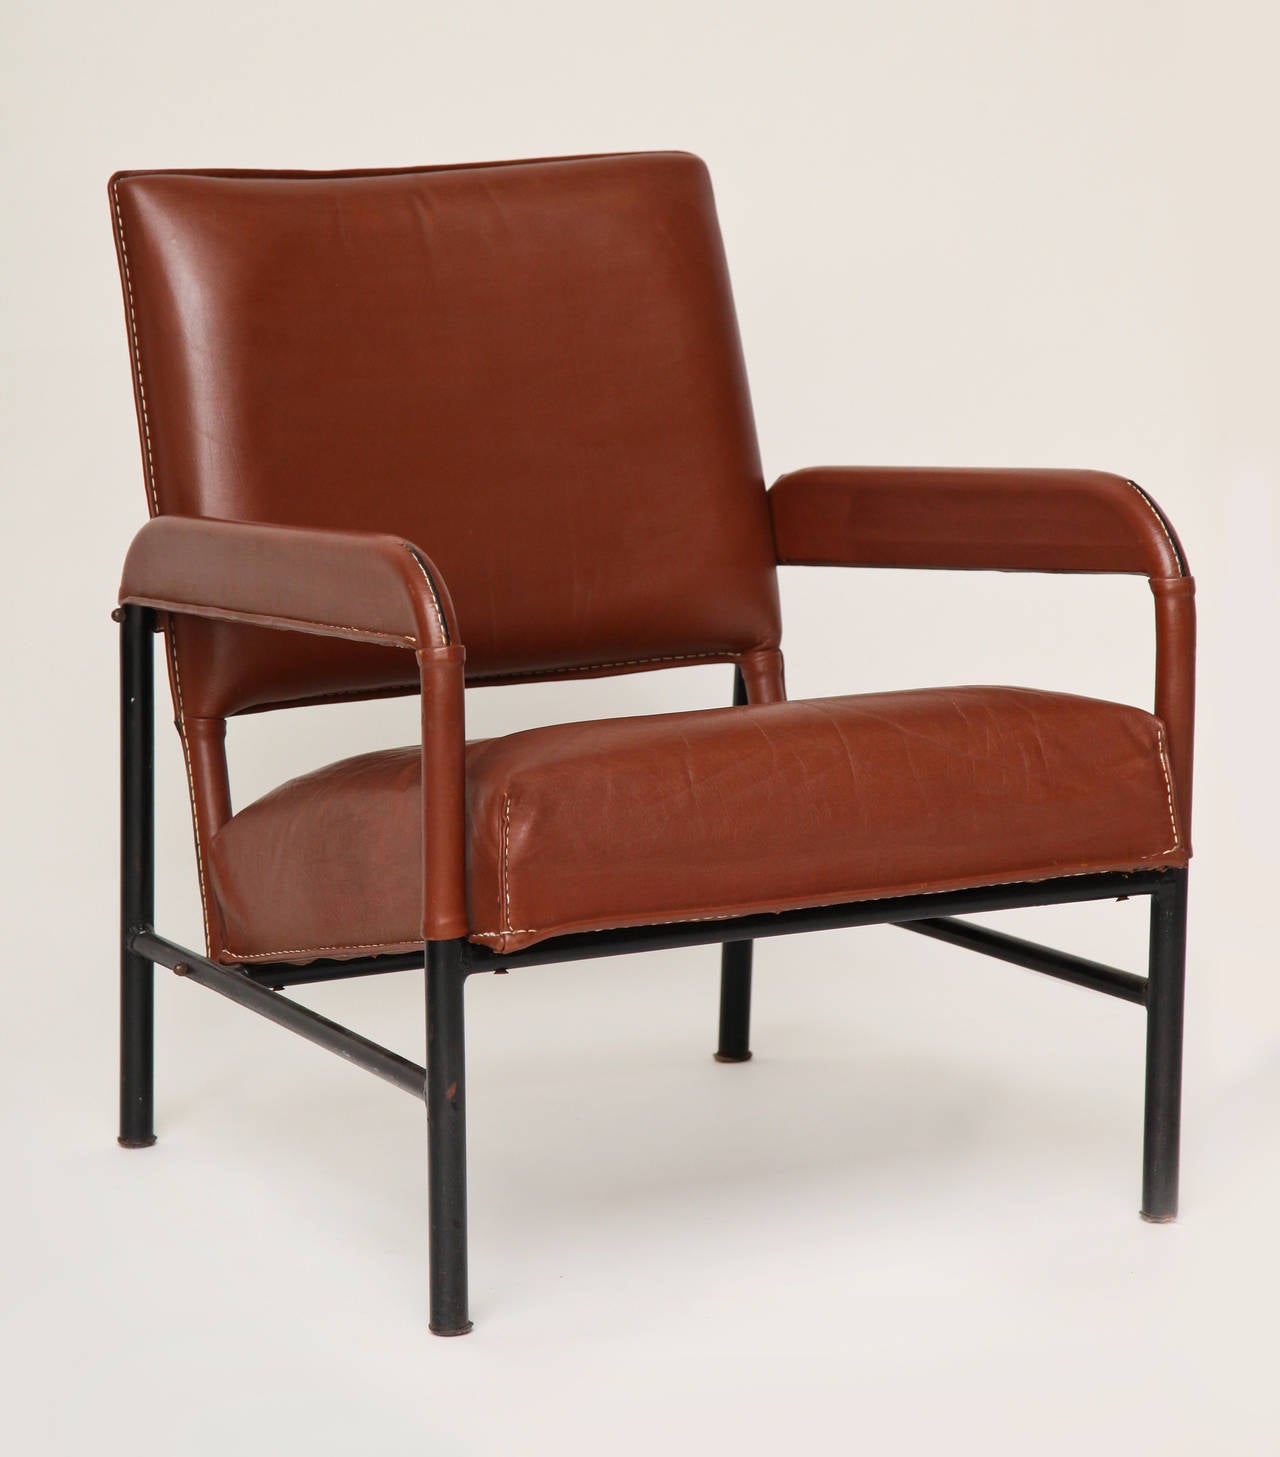 Set of three leather and cast iron armchairs in the manner of Jacques Adnet.